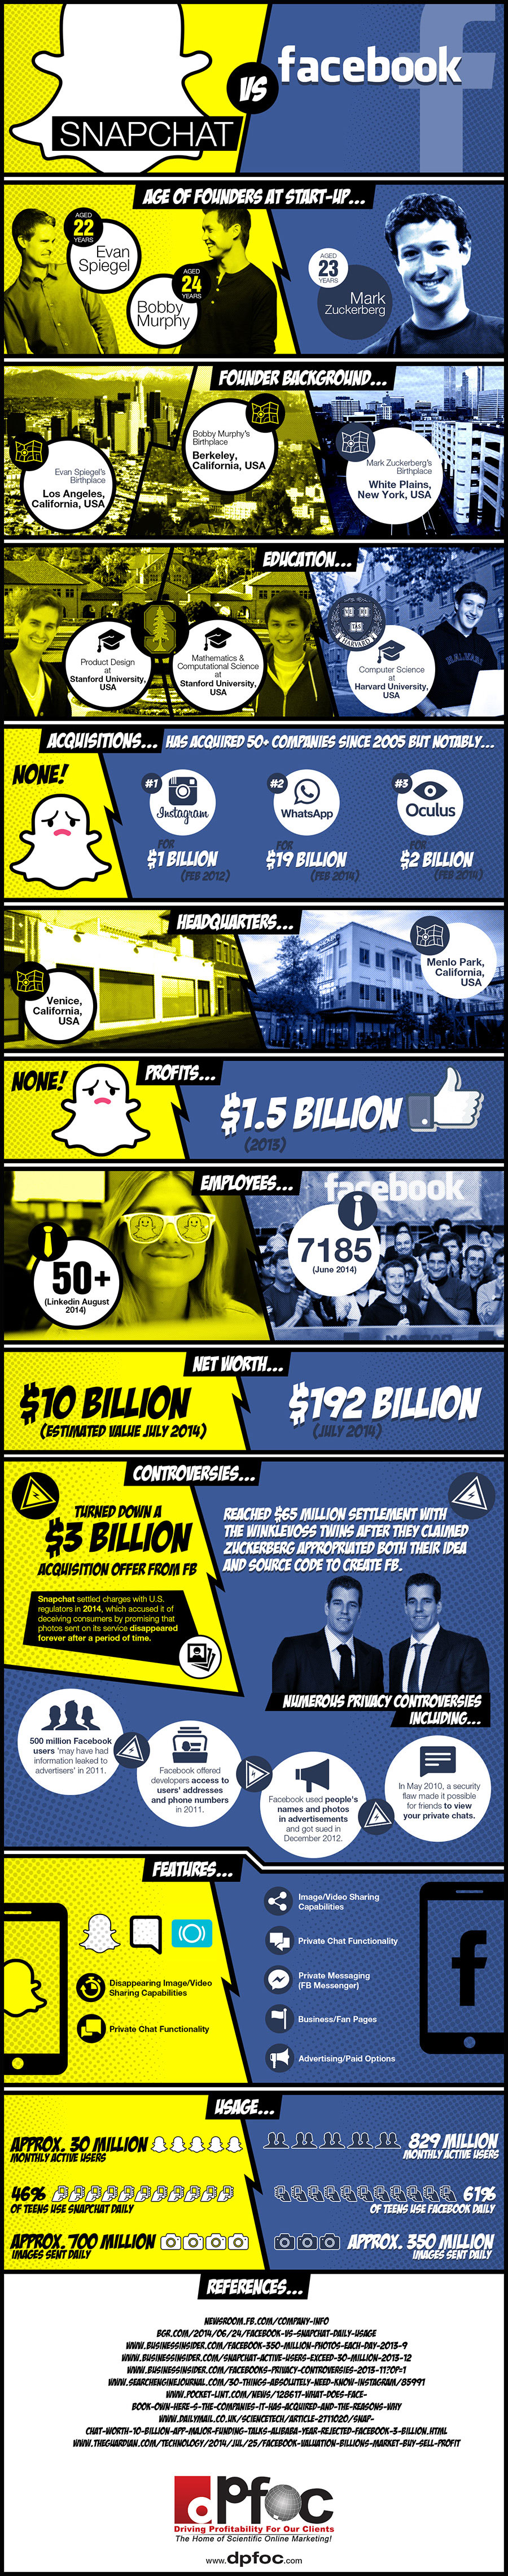 Snapchat and Facebook compared